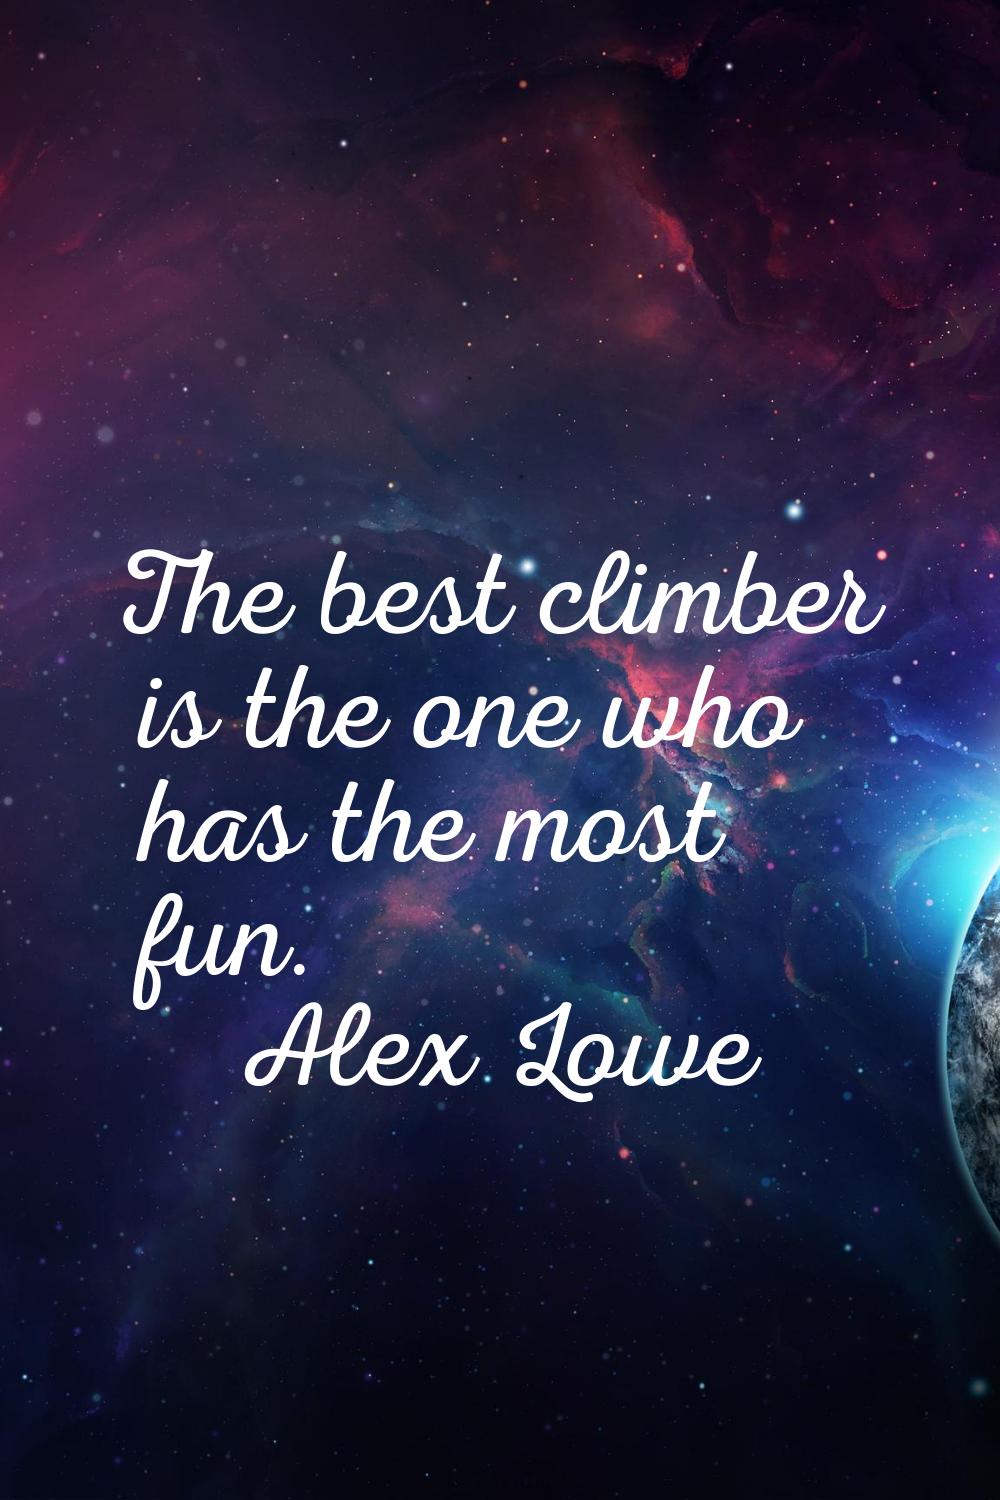 The best climber is the one who has the most fun.